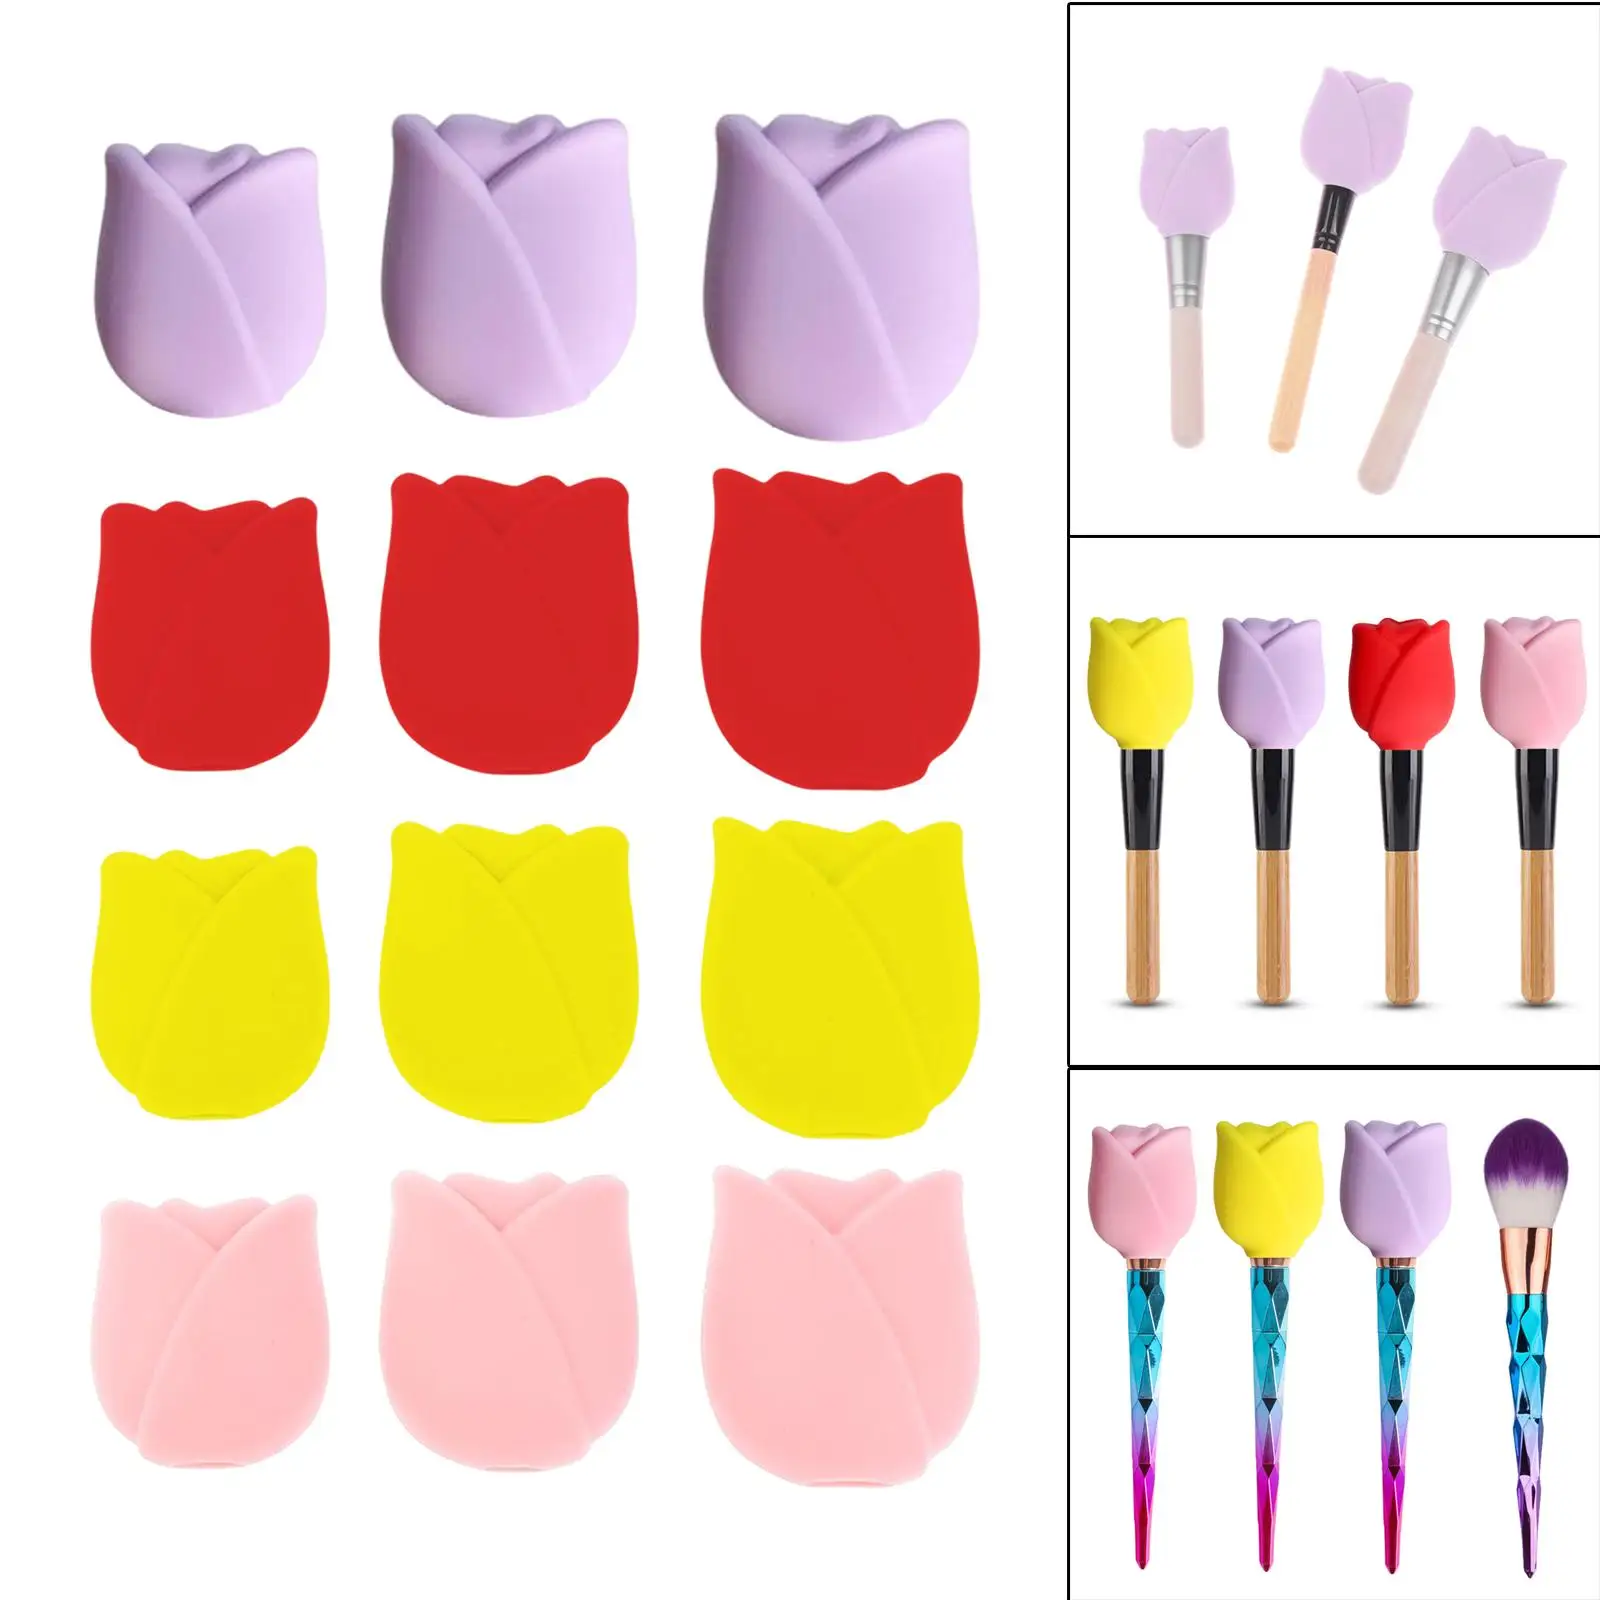 3Pcs Portable Silicone Makeup Brush Cover Easy to Clean Flower Shaped Reusable Makeup Brush Case Holder for Trip Home Wife